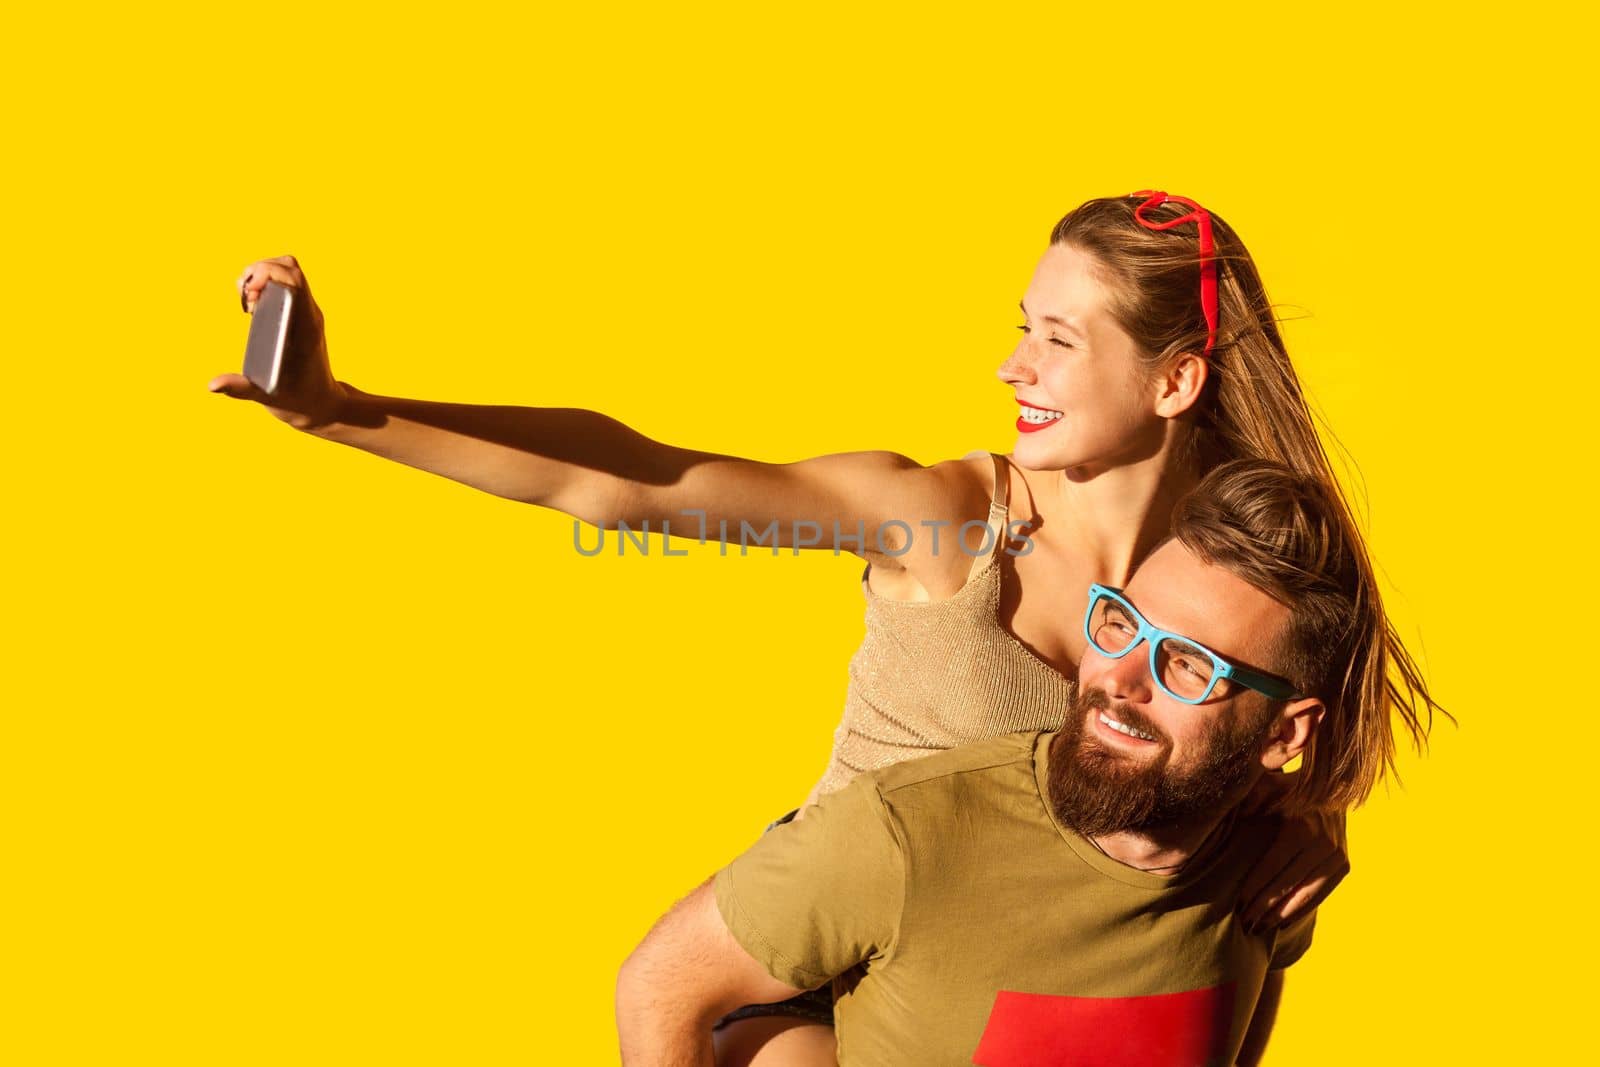 Portrait of happy funny positive man and woman making selfie on mobile phone, smiling happily, having fun together on date, piggyback. Indoor studio shot isolated on yellow background.